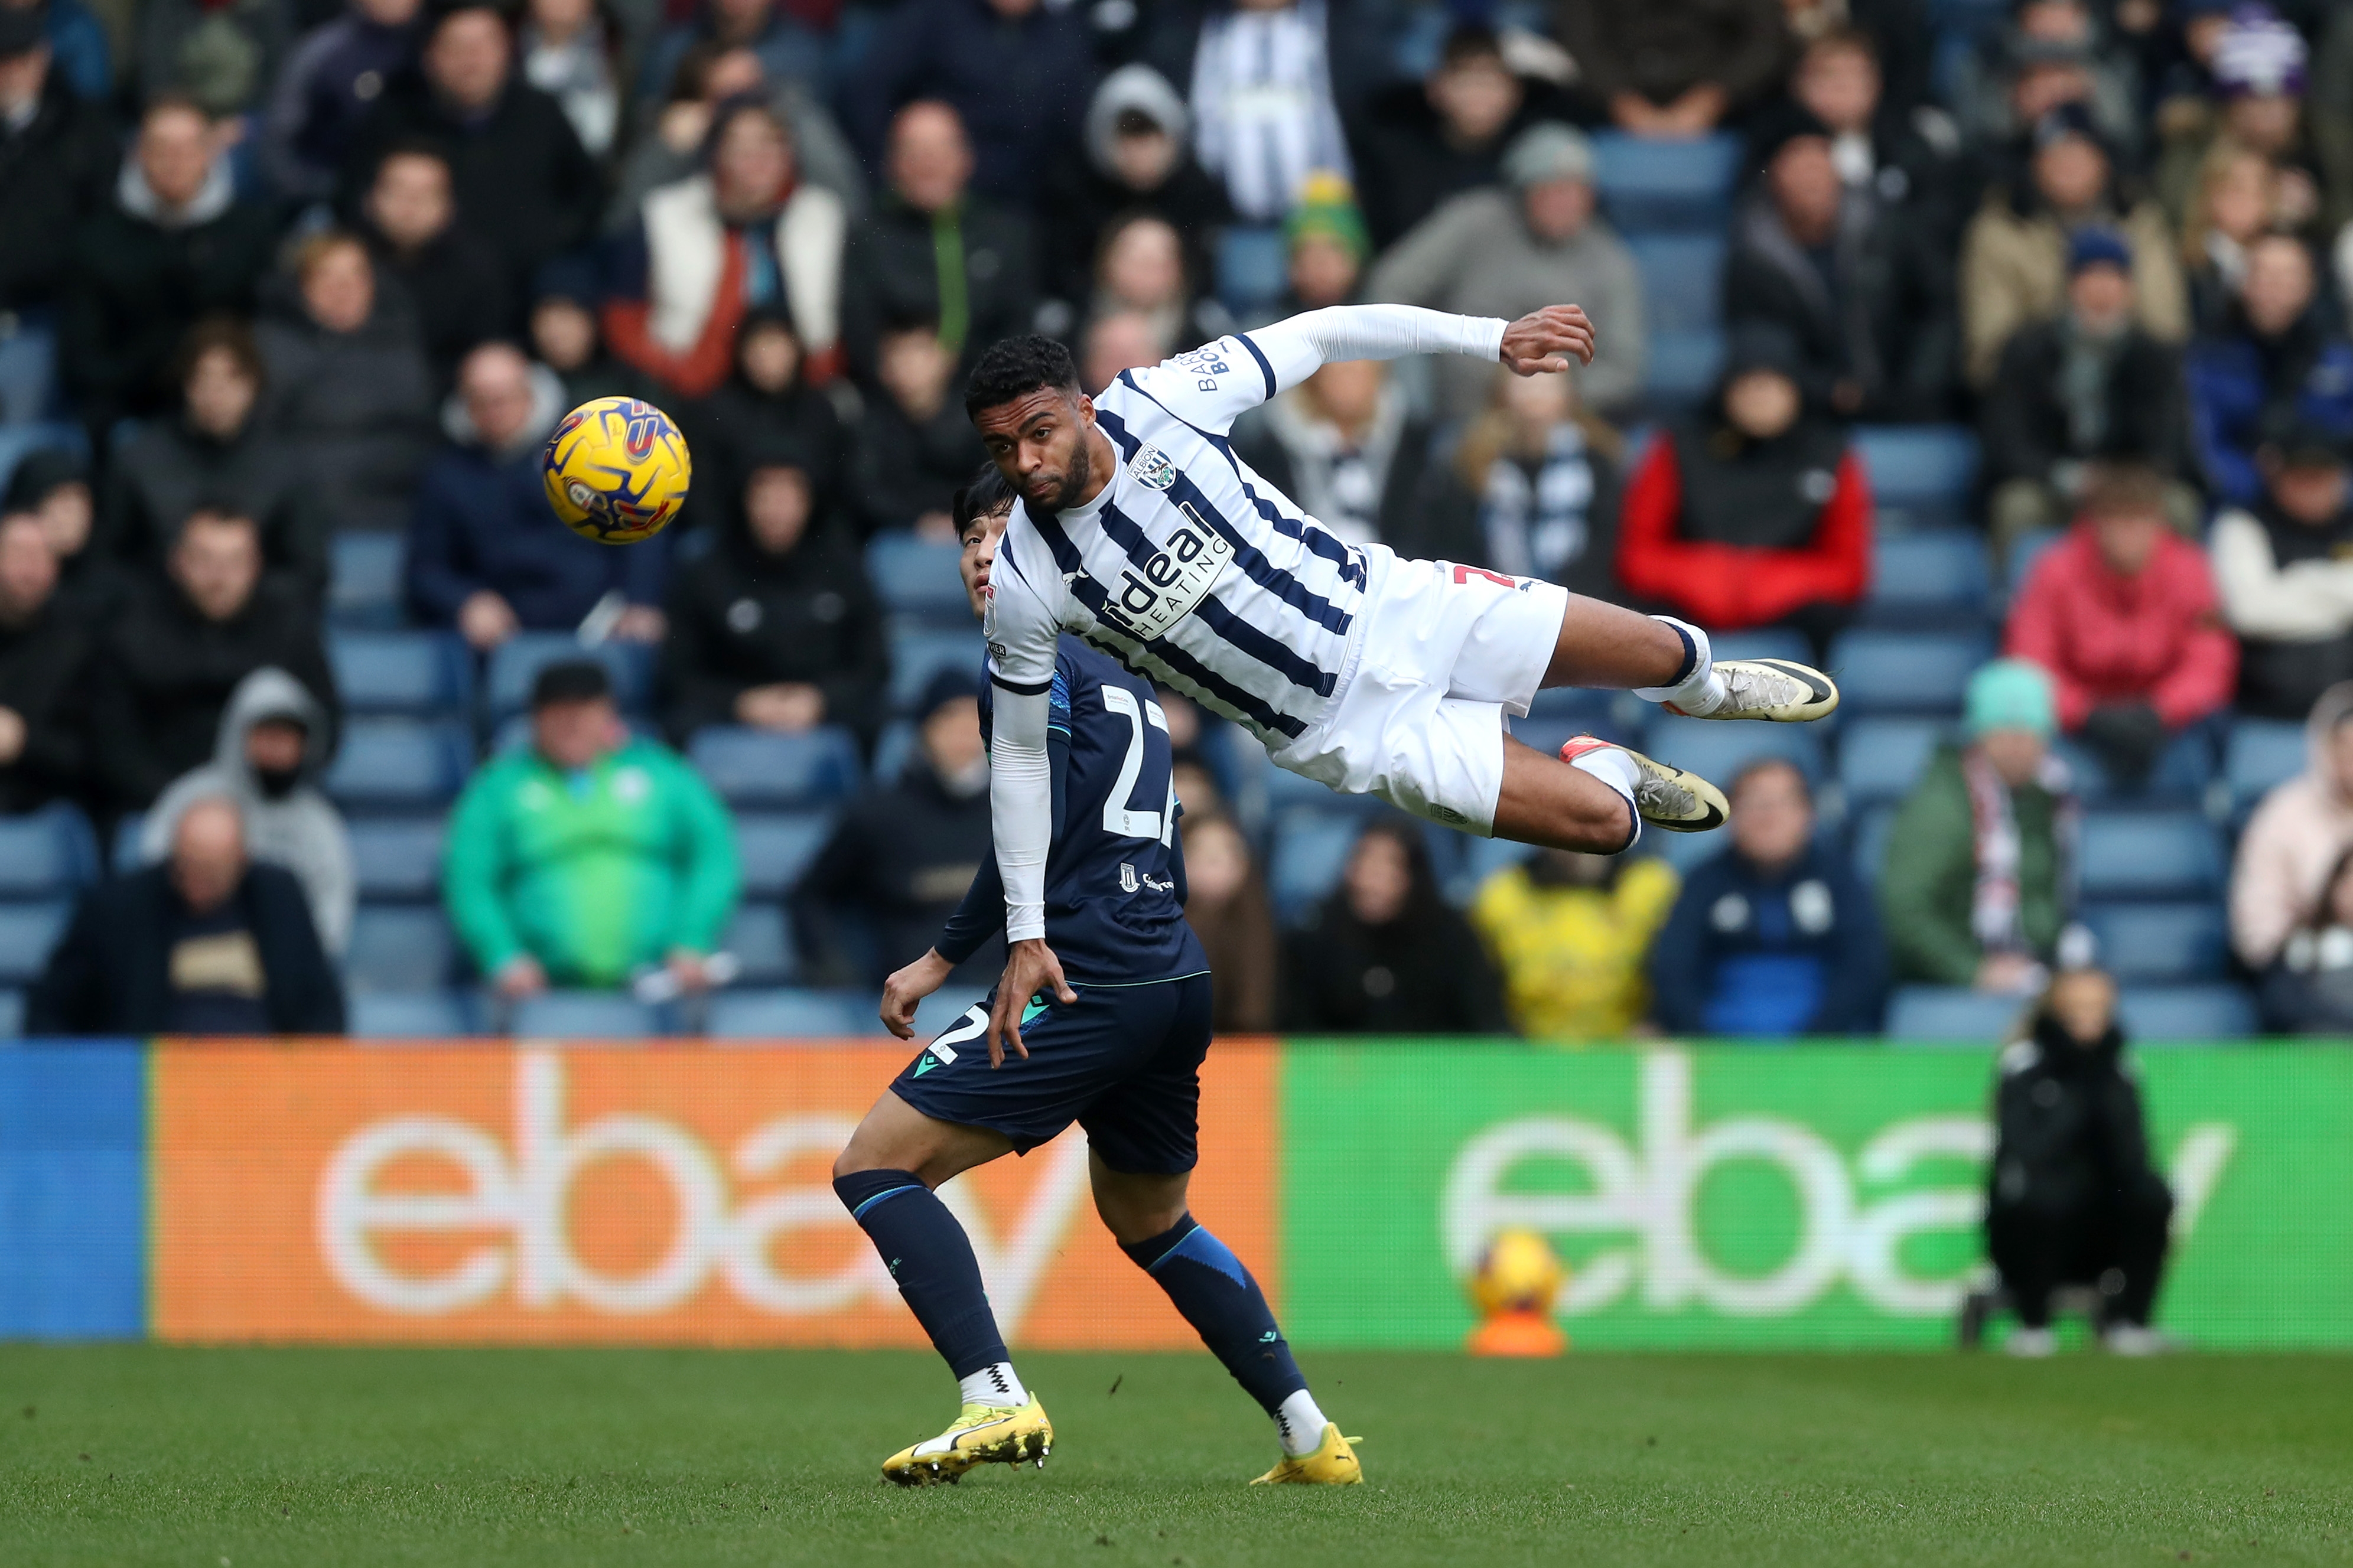 Darnell Furlong flying through the air to head the ball against Stoke